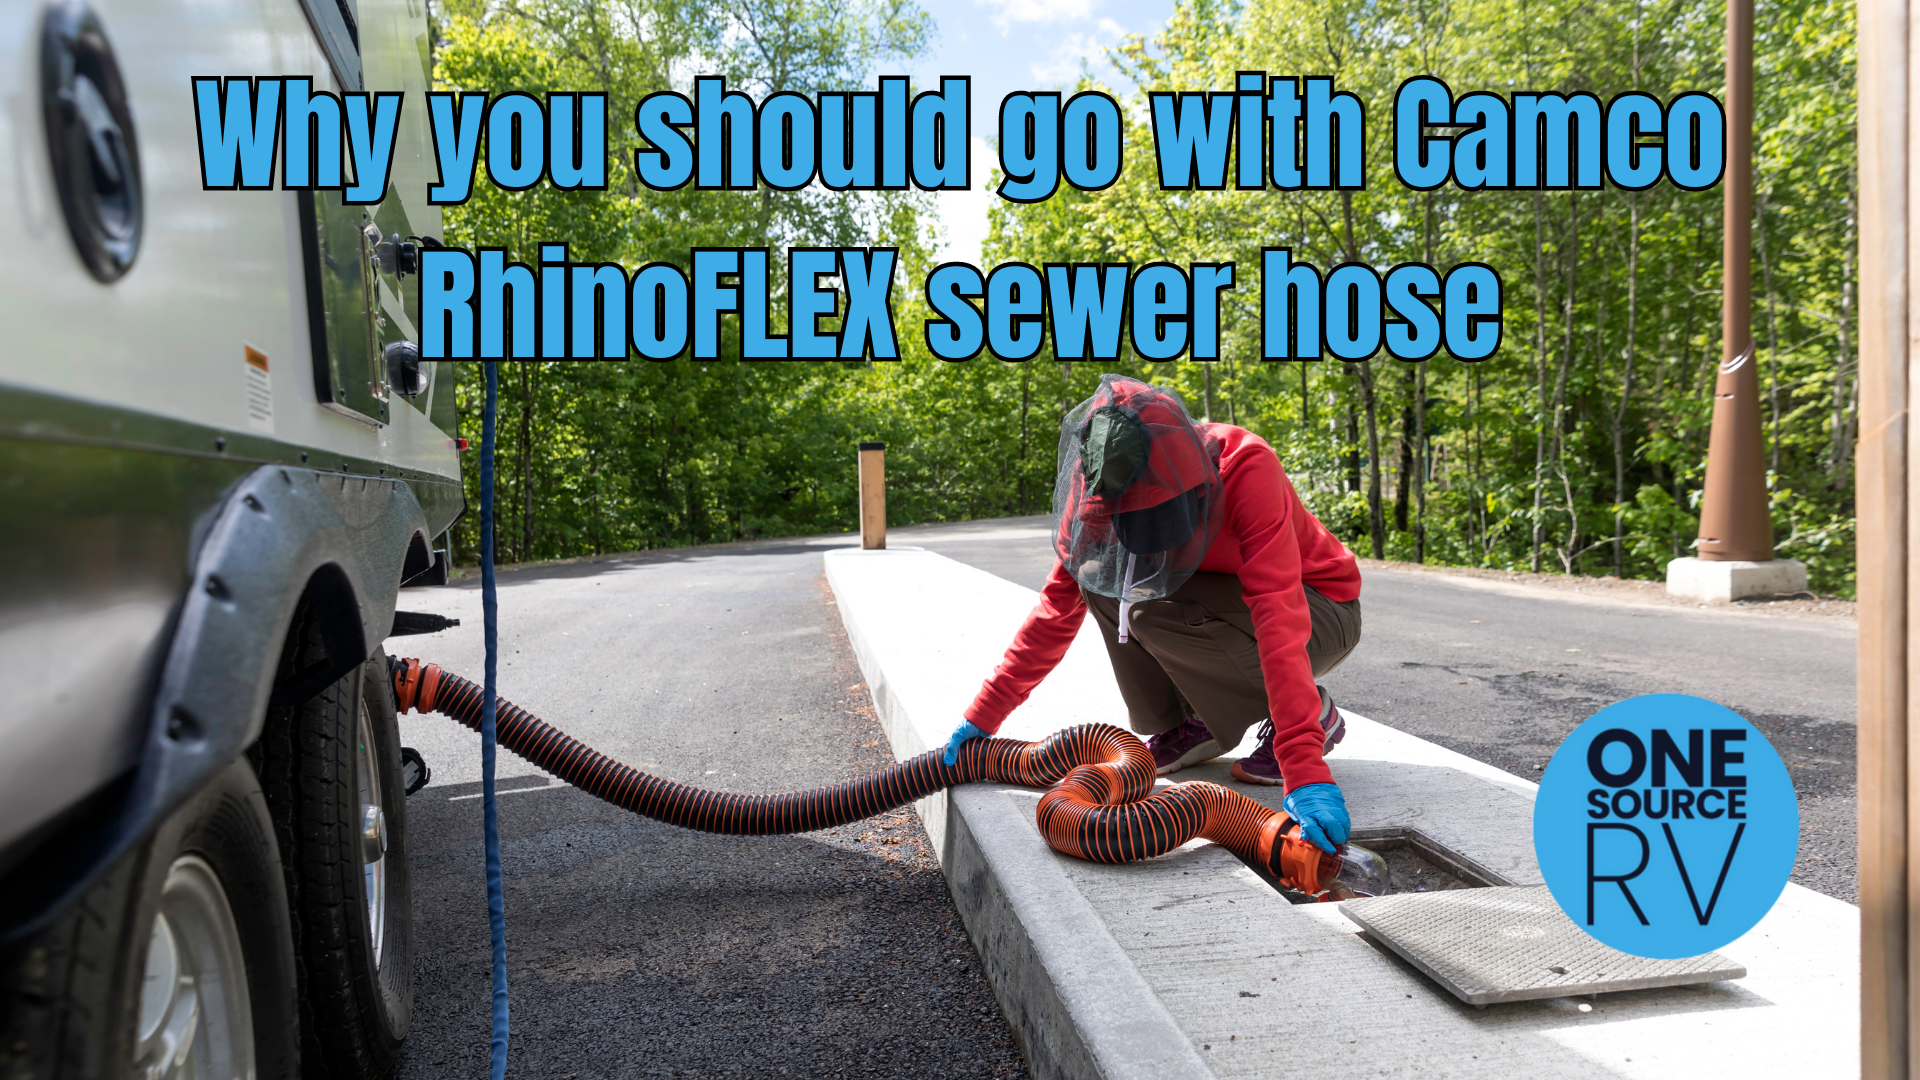 Why you should go with Camco RhinoFLEX sewer hose